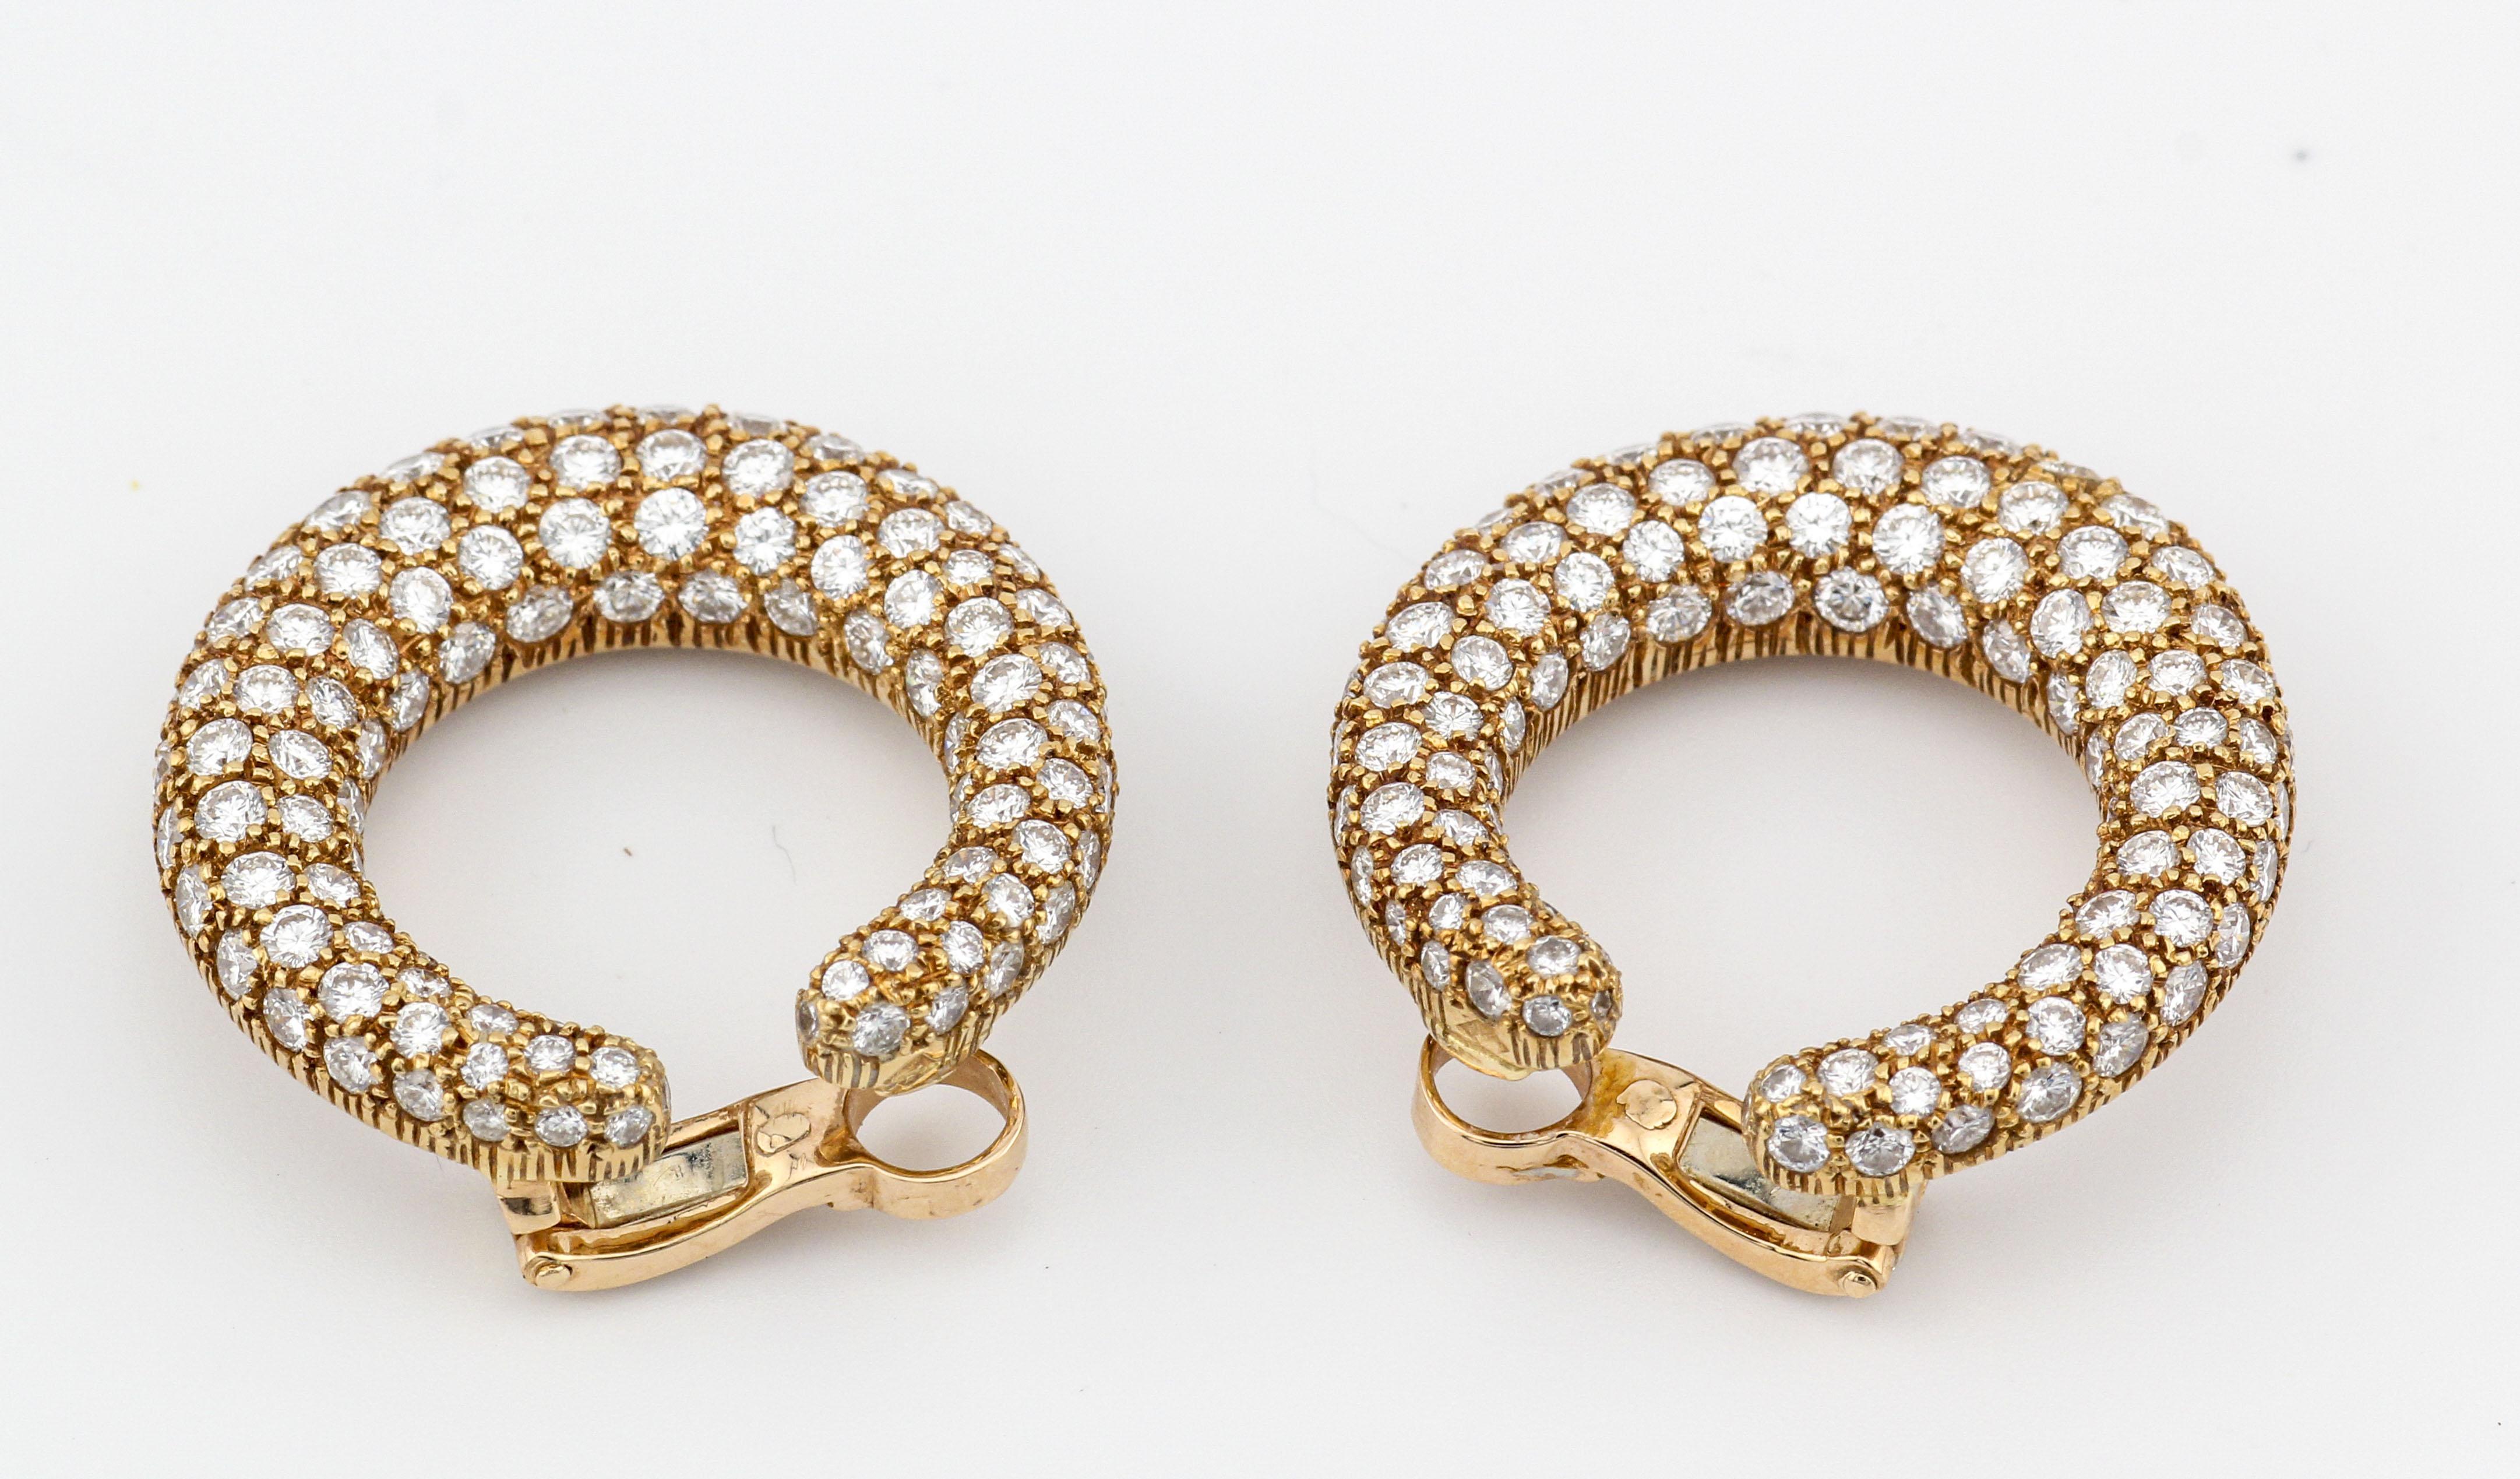 The Cartier Creole Pave Diamond 18K Yellow Gold Hoop Earrings are a dazzling and exquisite example of Cartier's commitment to timeless elegance and superior craftsmanship. These earrings epitomize luxury, combining the radiant warmth of 18K yellow